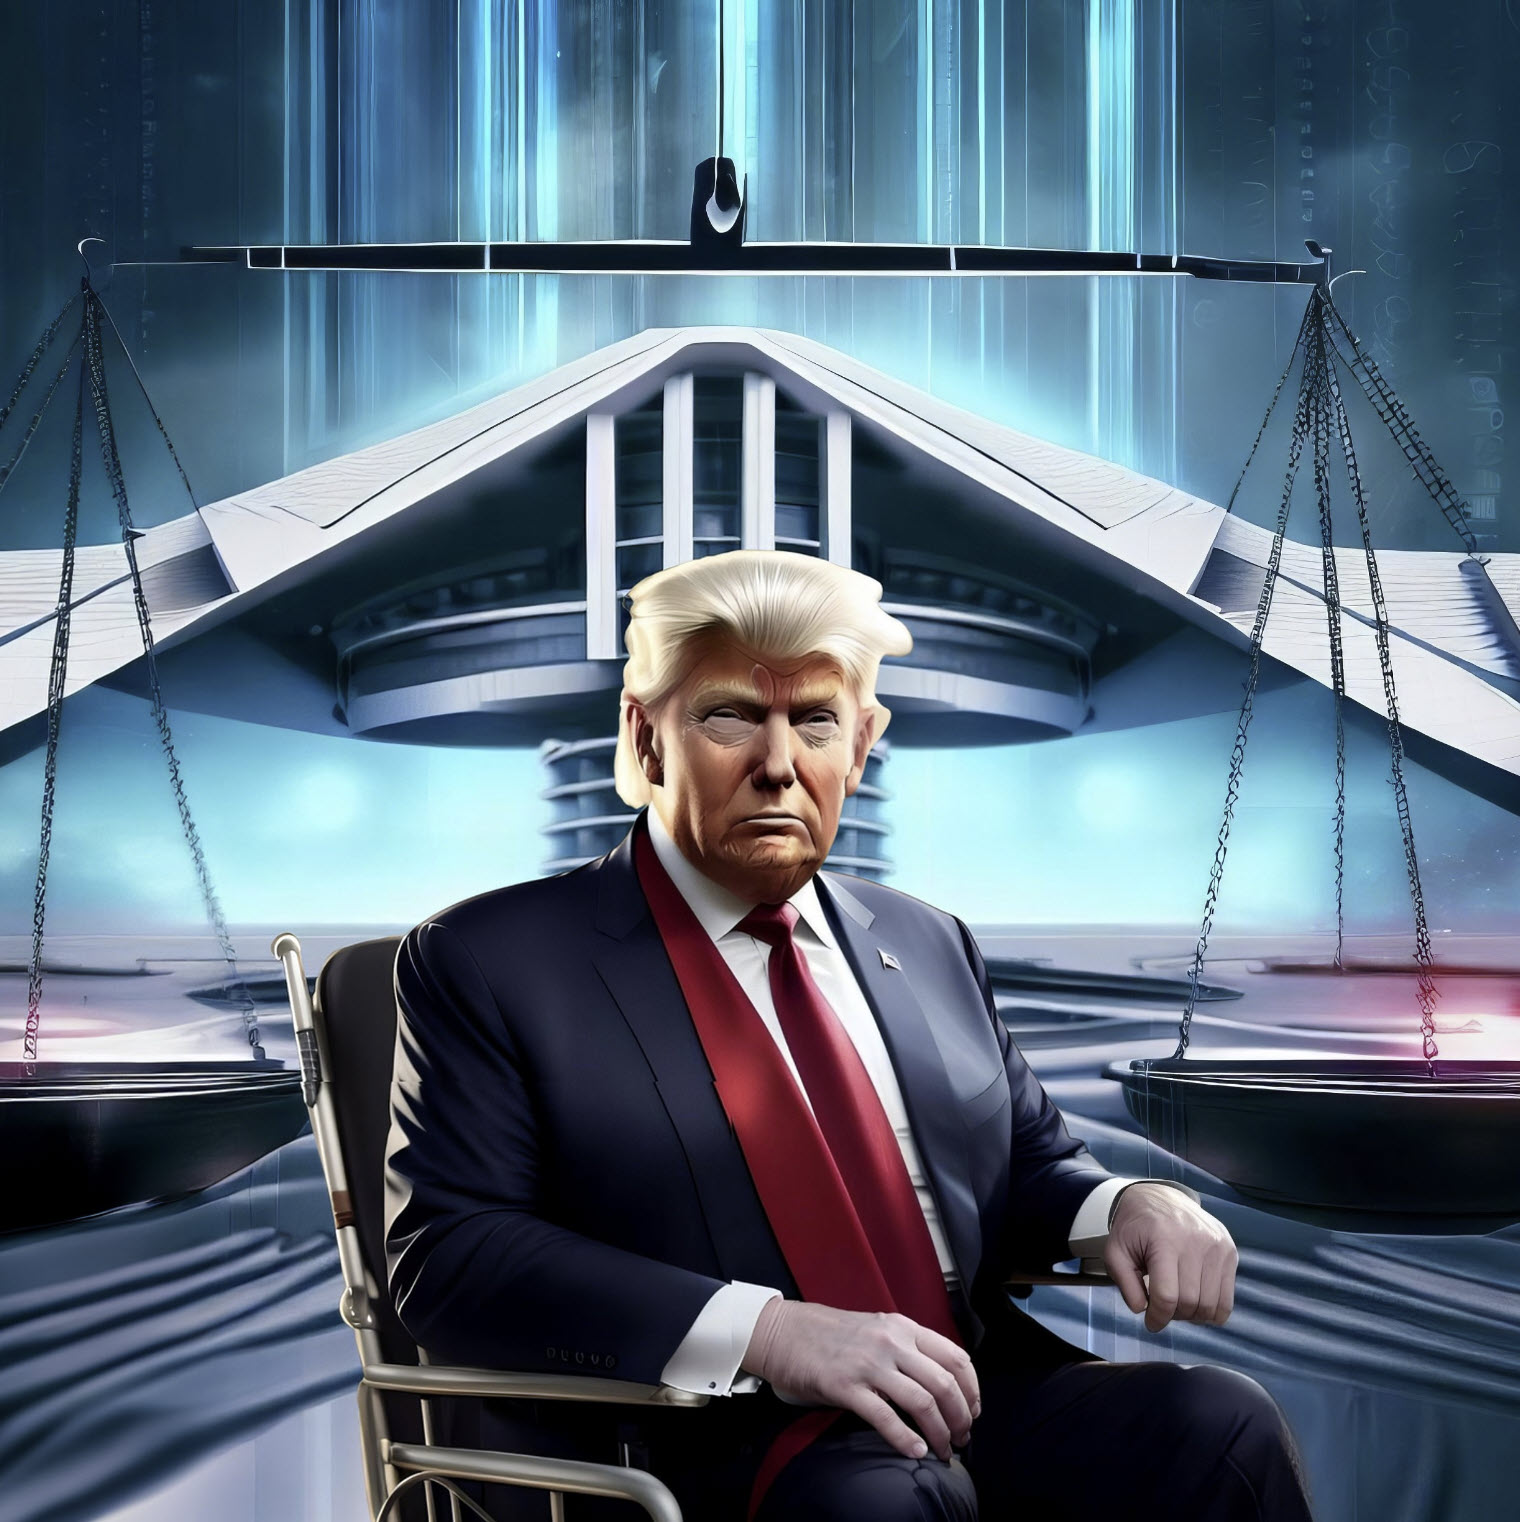 Trump as 104-year-old man in a wheelchair in front of a futuristic courthouse in the year 2050